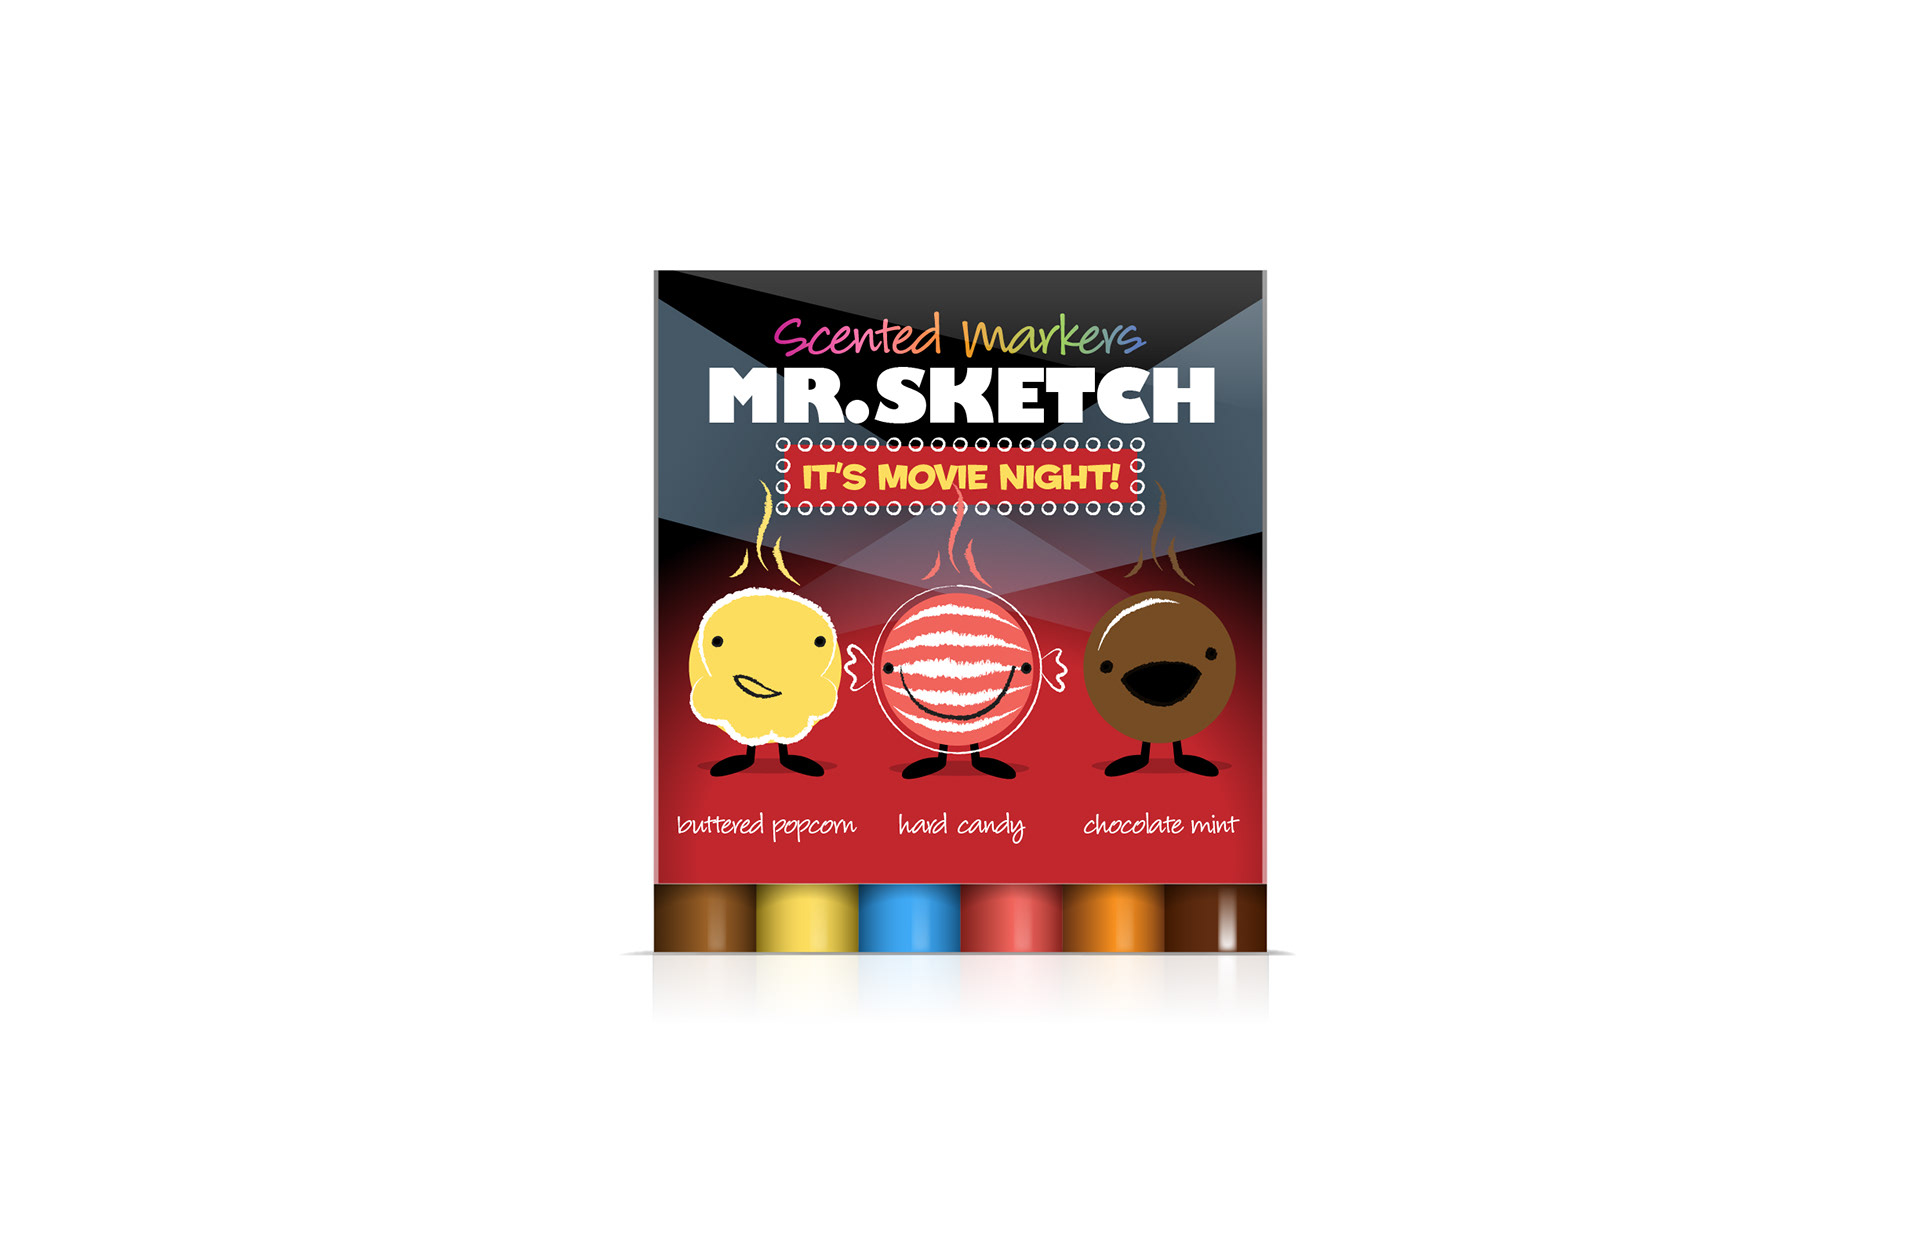 MR. SKETCH SCENTED MARKERS - Creative Kids